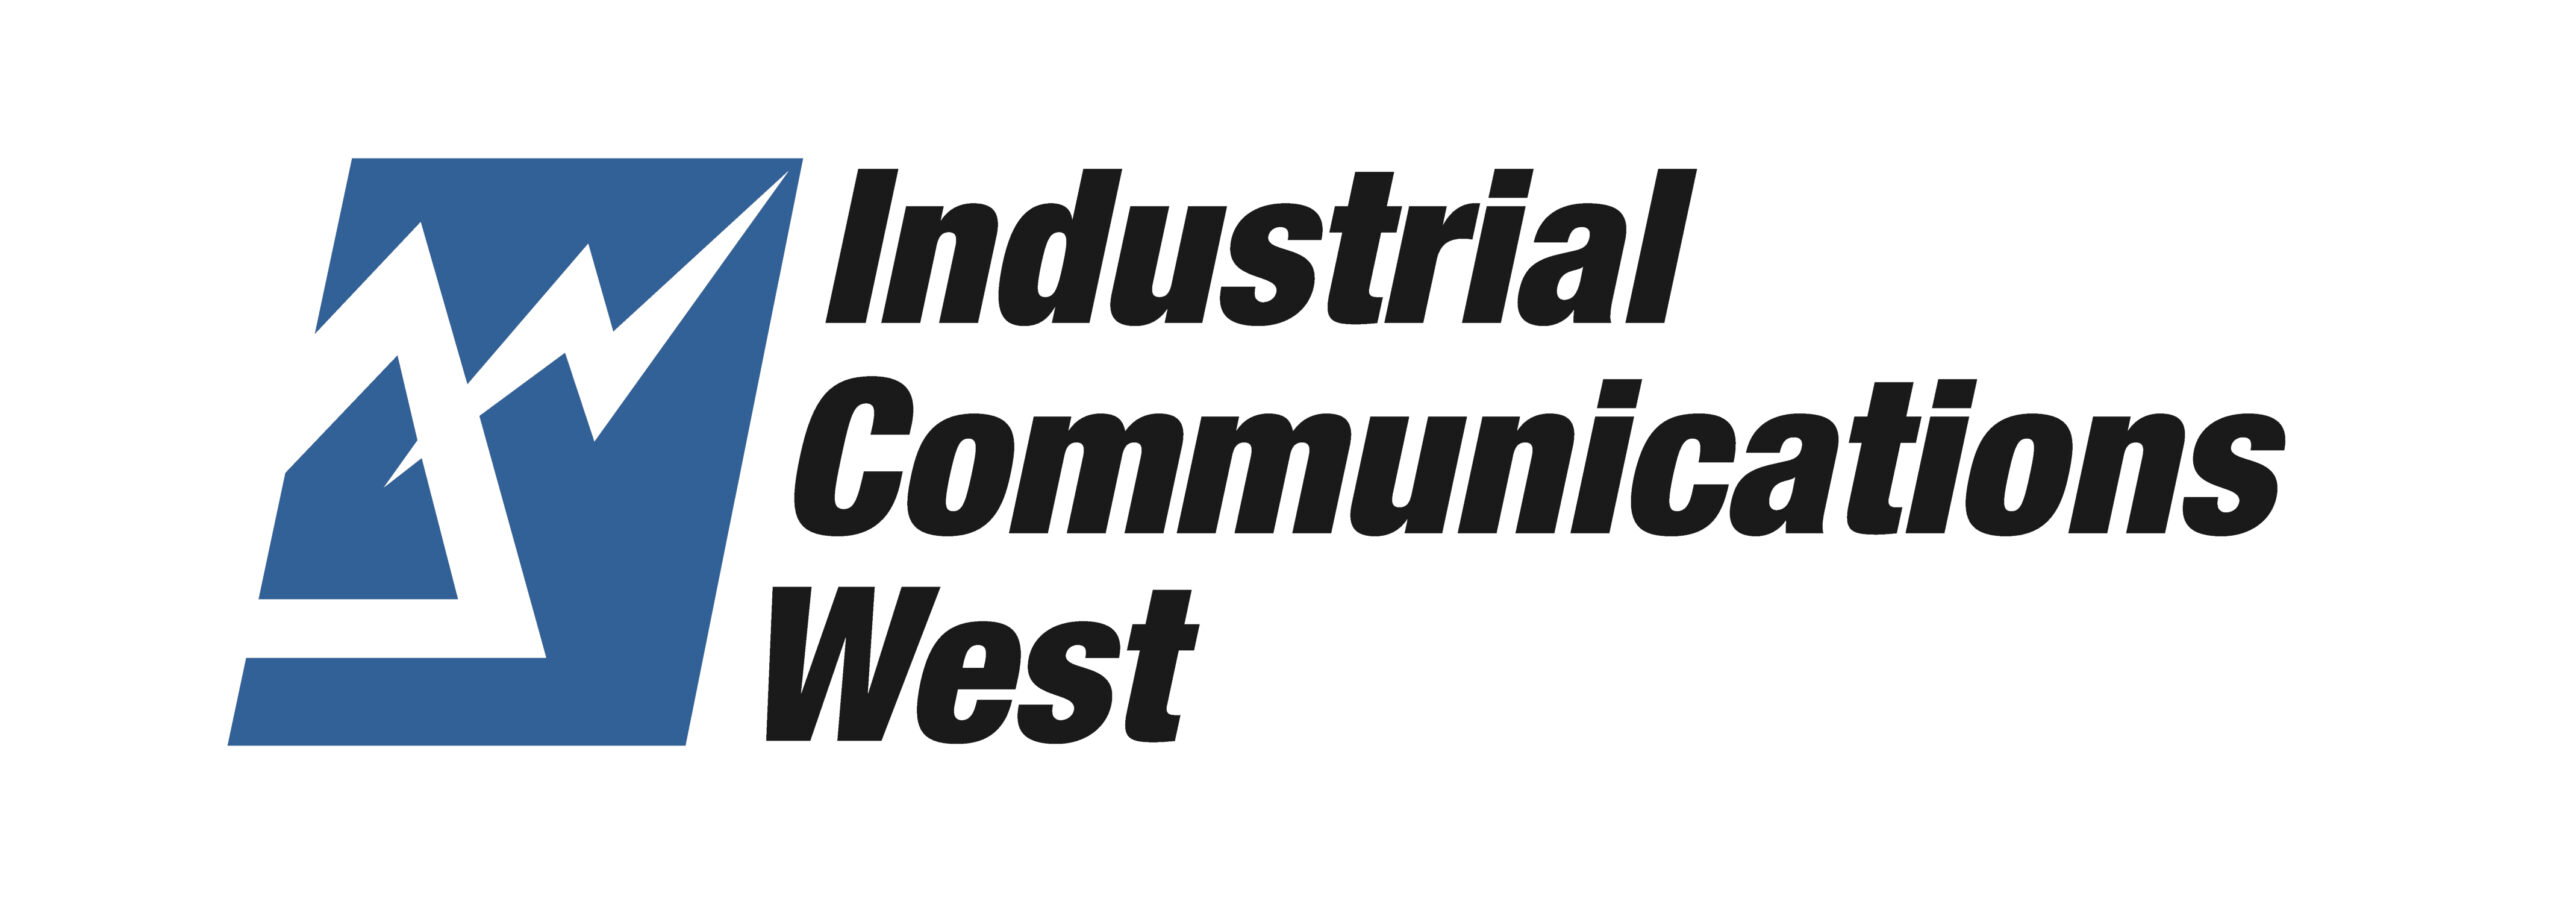 Industrial Communications West